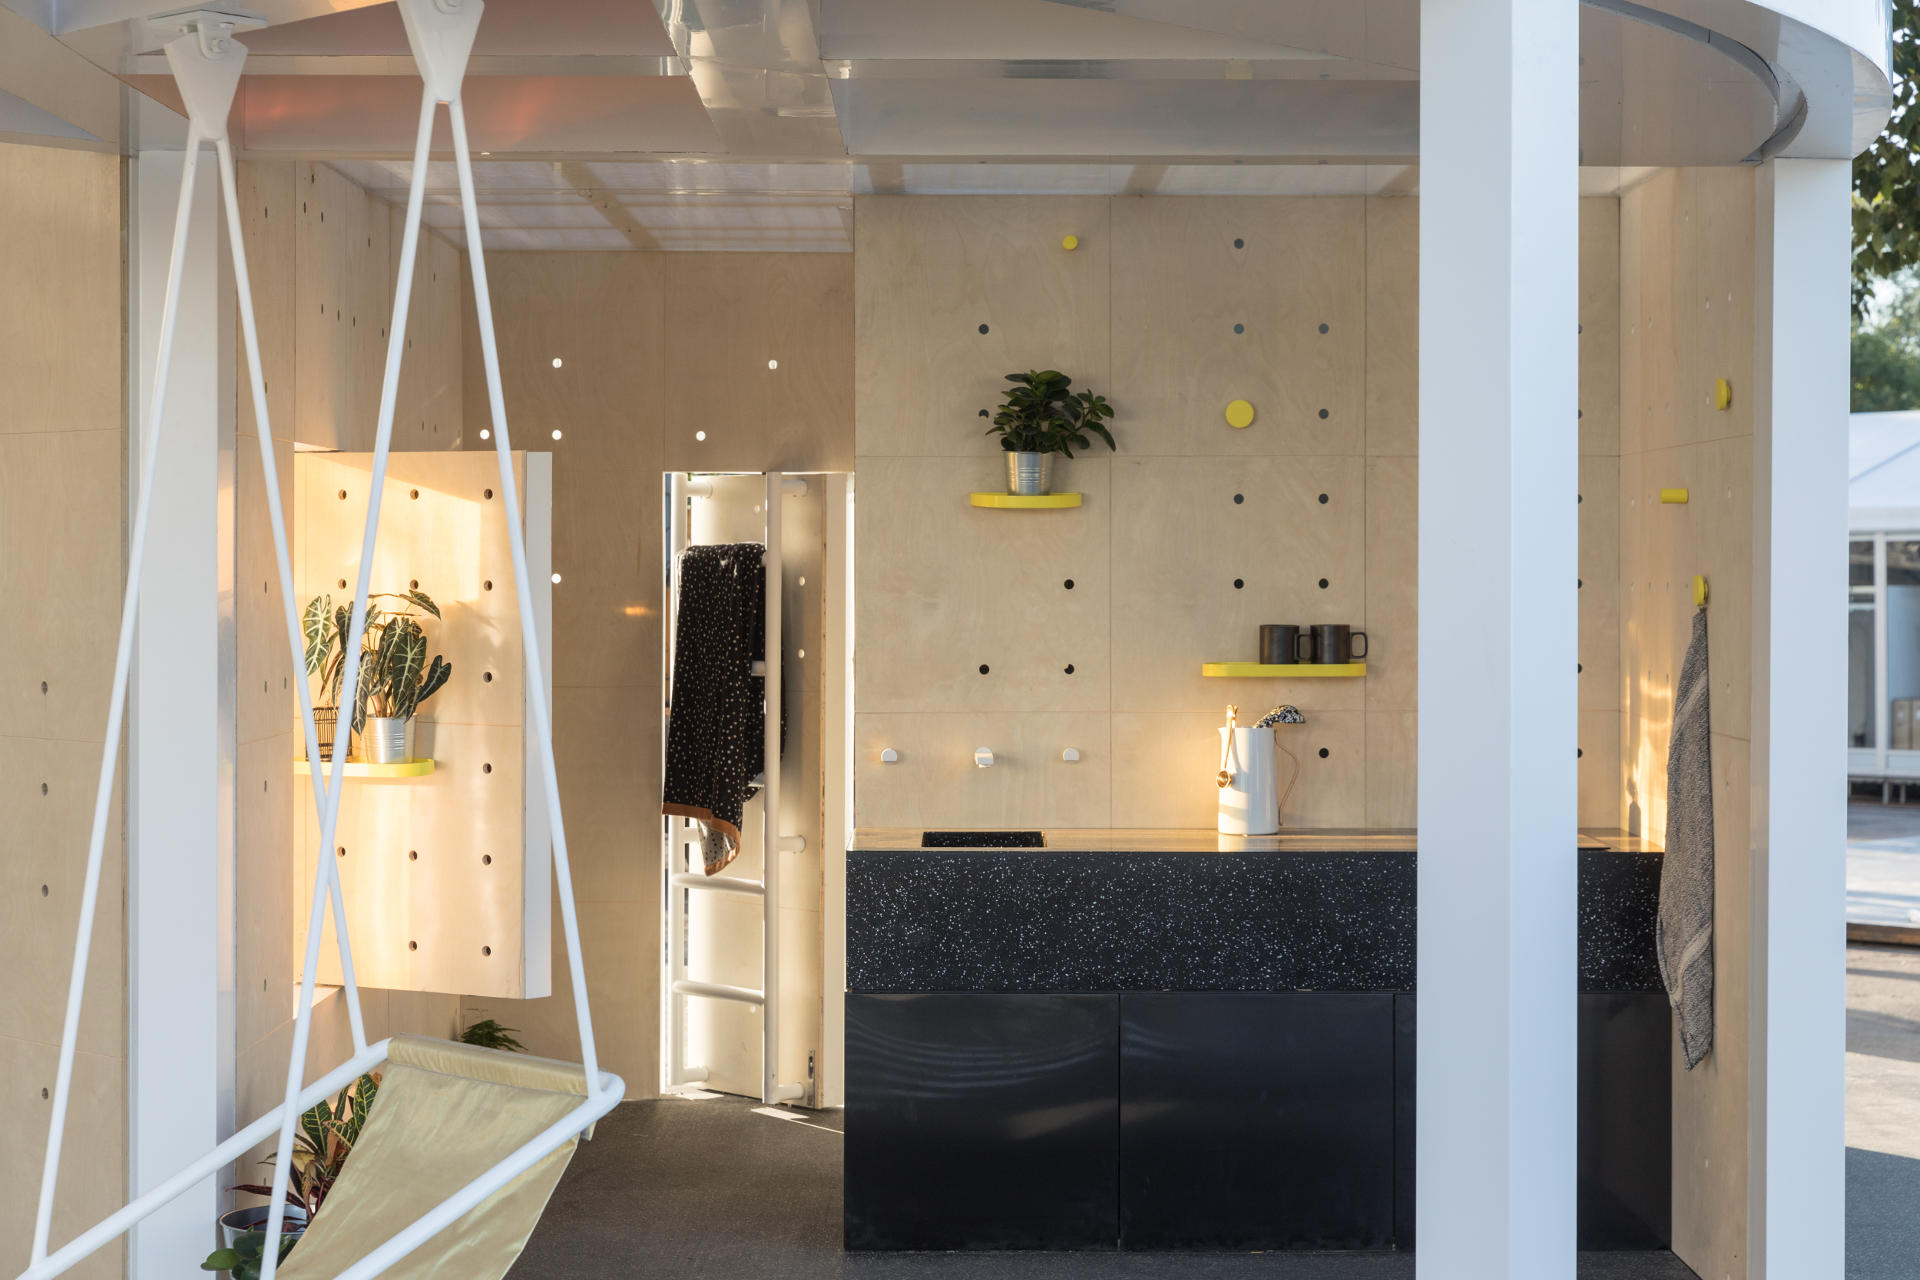 MINI Lives Up To Its Name And Builds A Tiny Apartment In Beijing